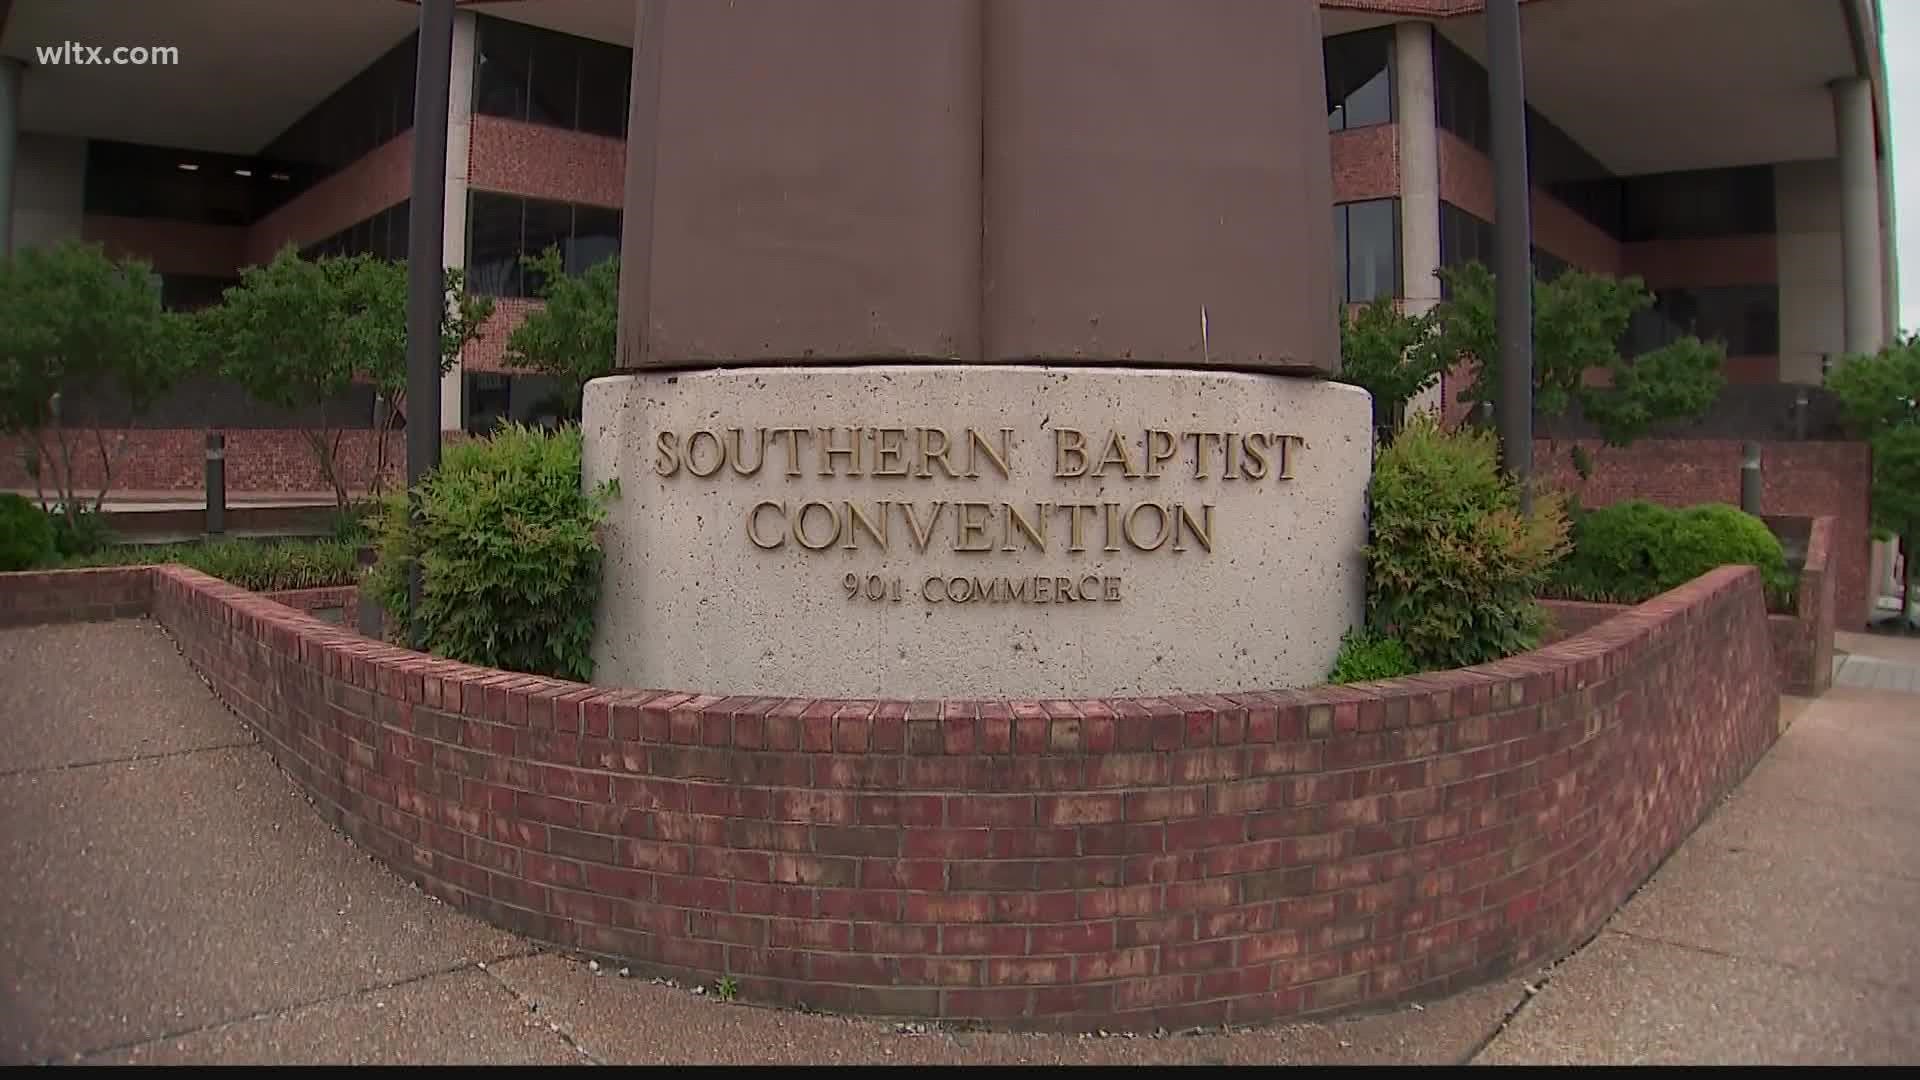 The news comes more than two months after the SBC released a previously secret list of hundreds of pastors and other personnel accused of sexual abuse.